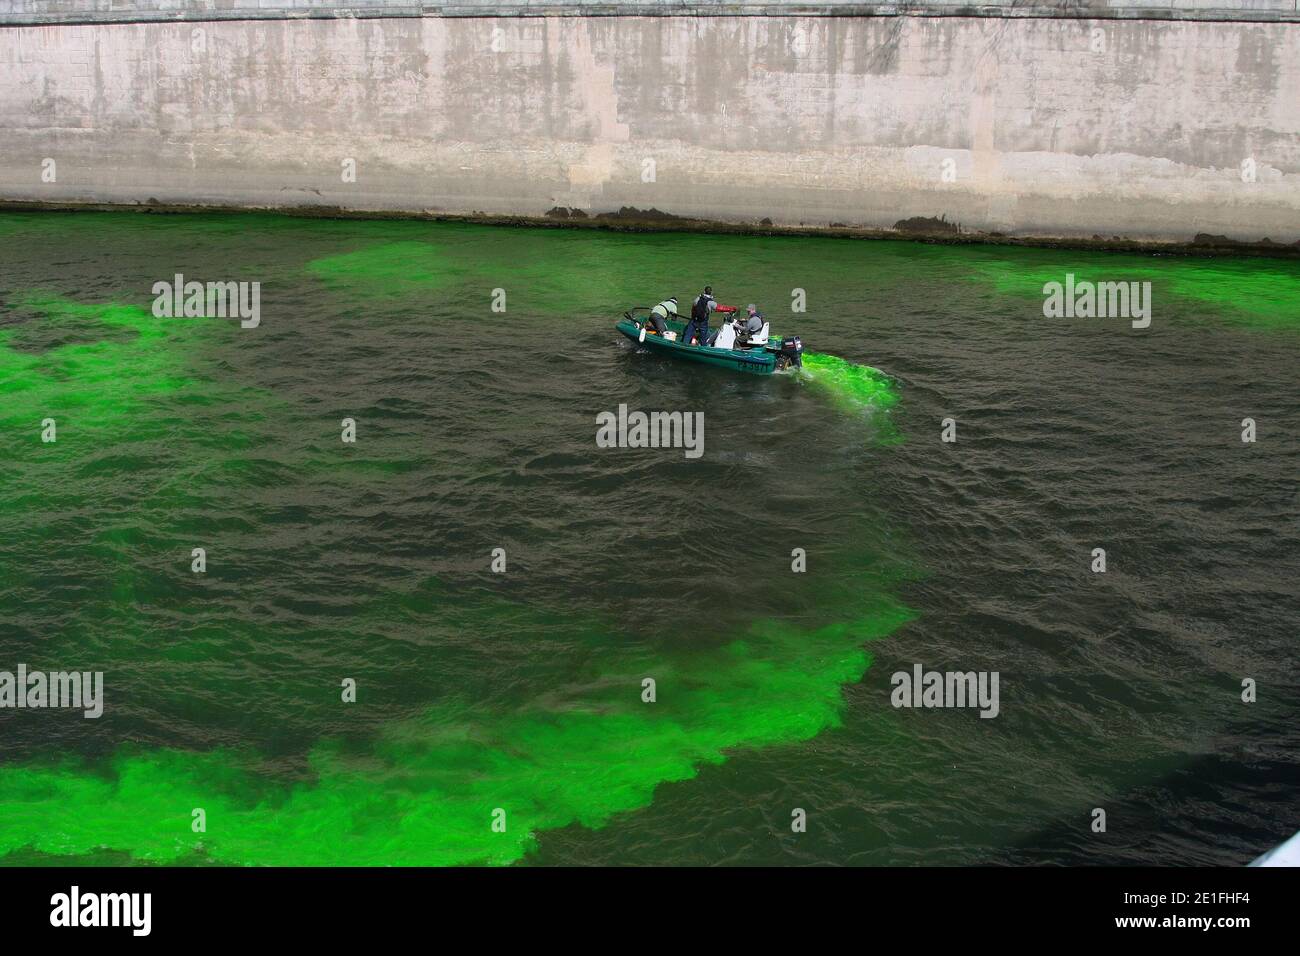 Environment emplyees tip a fluorescent product into the river Seine, Paris, France on March 22, 2011, as part of the World Water Day celebrations. The UN's food agency marked World Water Day, today by calling for new and innovative approaches to ensuring city dwellers in developing countries have access to safe and adequate water supplies. Photo by David Fritz/ABACAPRESS.COM Stock Photo